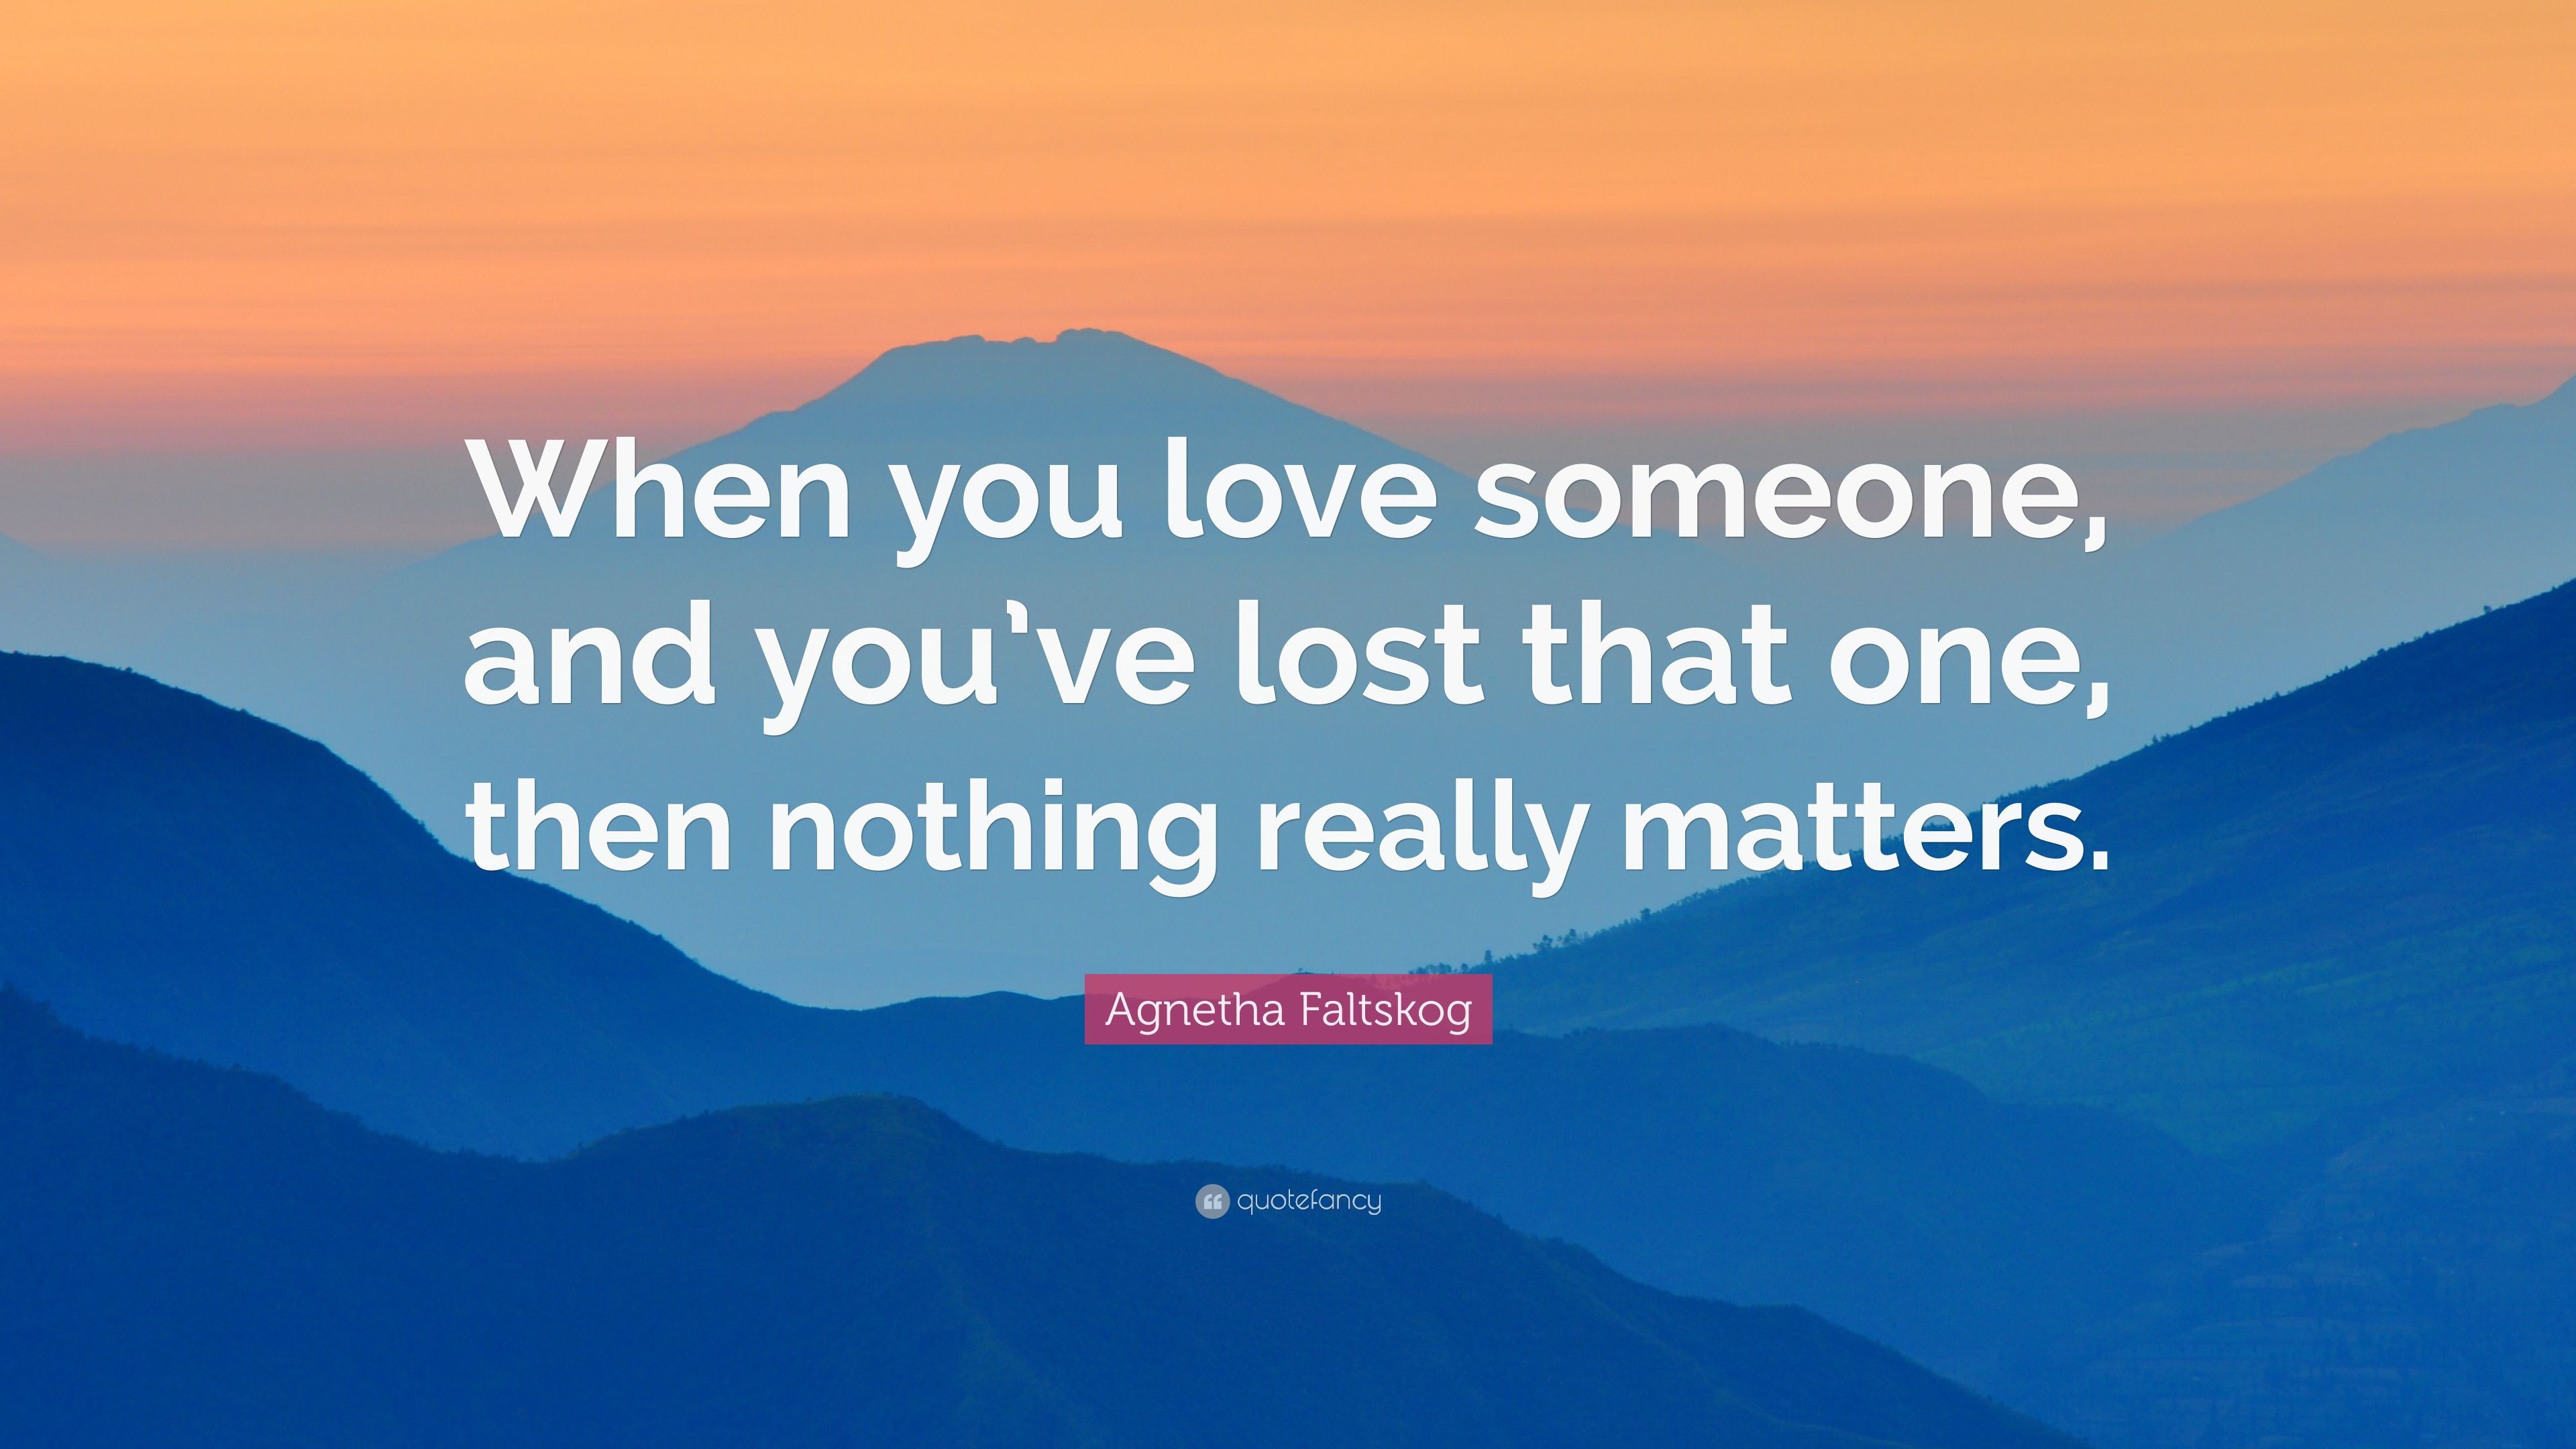 Agnetha Faltskog Quote: “When you love someone, and you've lost that one, then nothing really